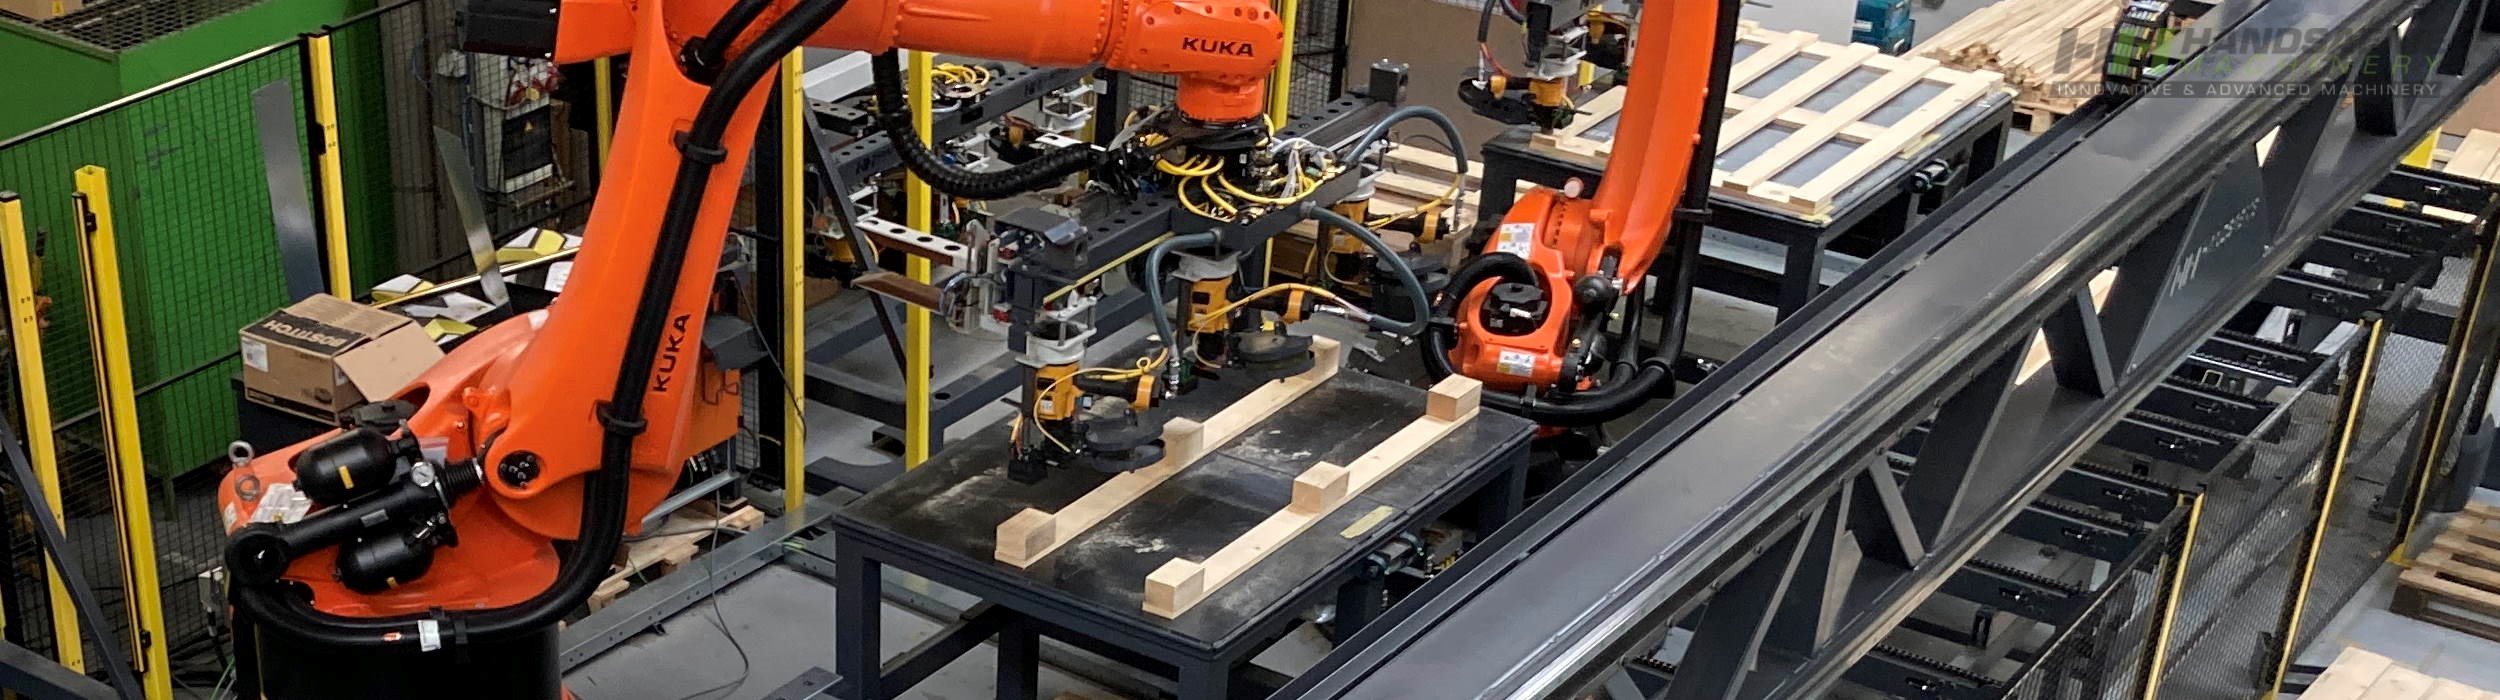 Autonomously and continuously assembling of complete pallets